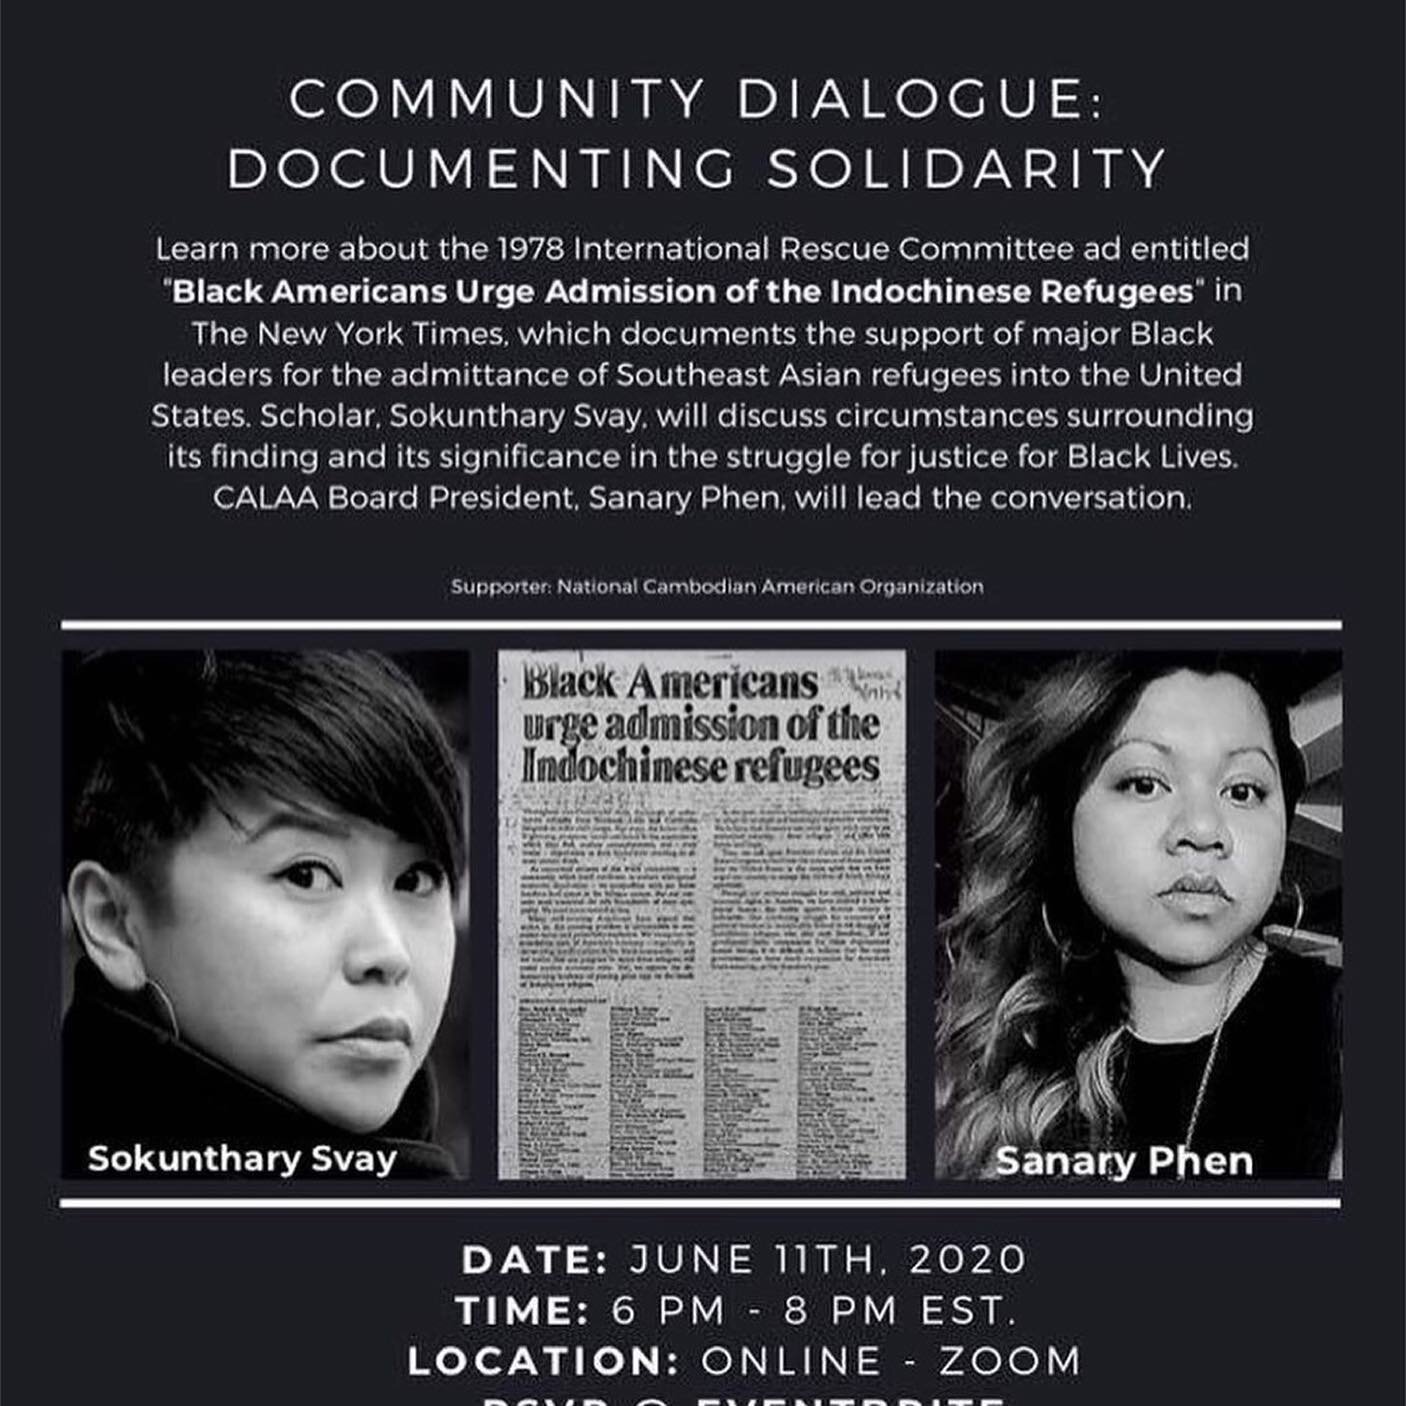 Repost from @theseadproject
&bull;
Join @calaalowell Board President, Sanary Phen (@_sanary_), in a virtual conversation with scholar, Sokunthary Svay (@svaysokun). They will discuss the 1978 International Rescue Committee ad entitled &quot;Black Ame